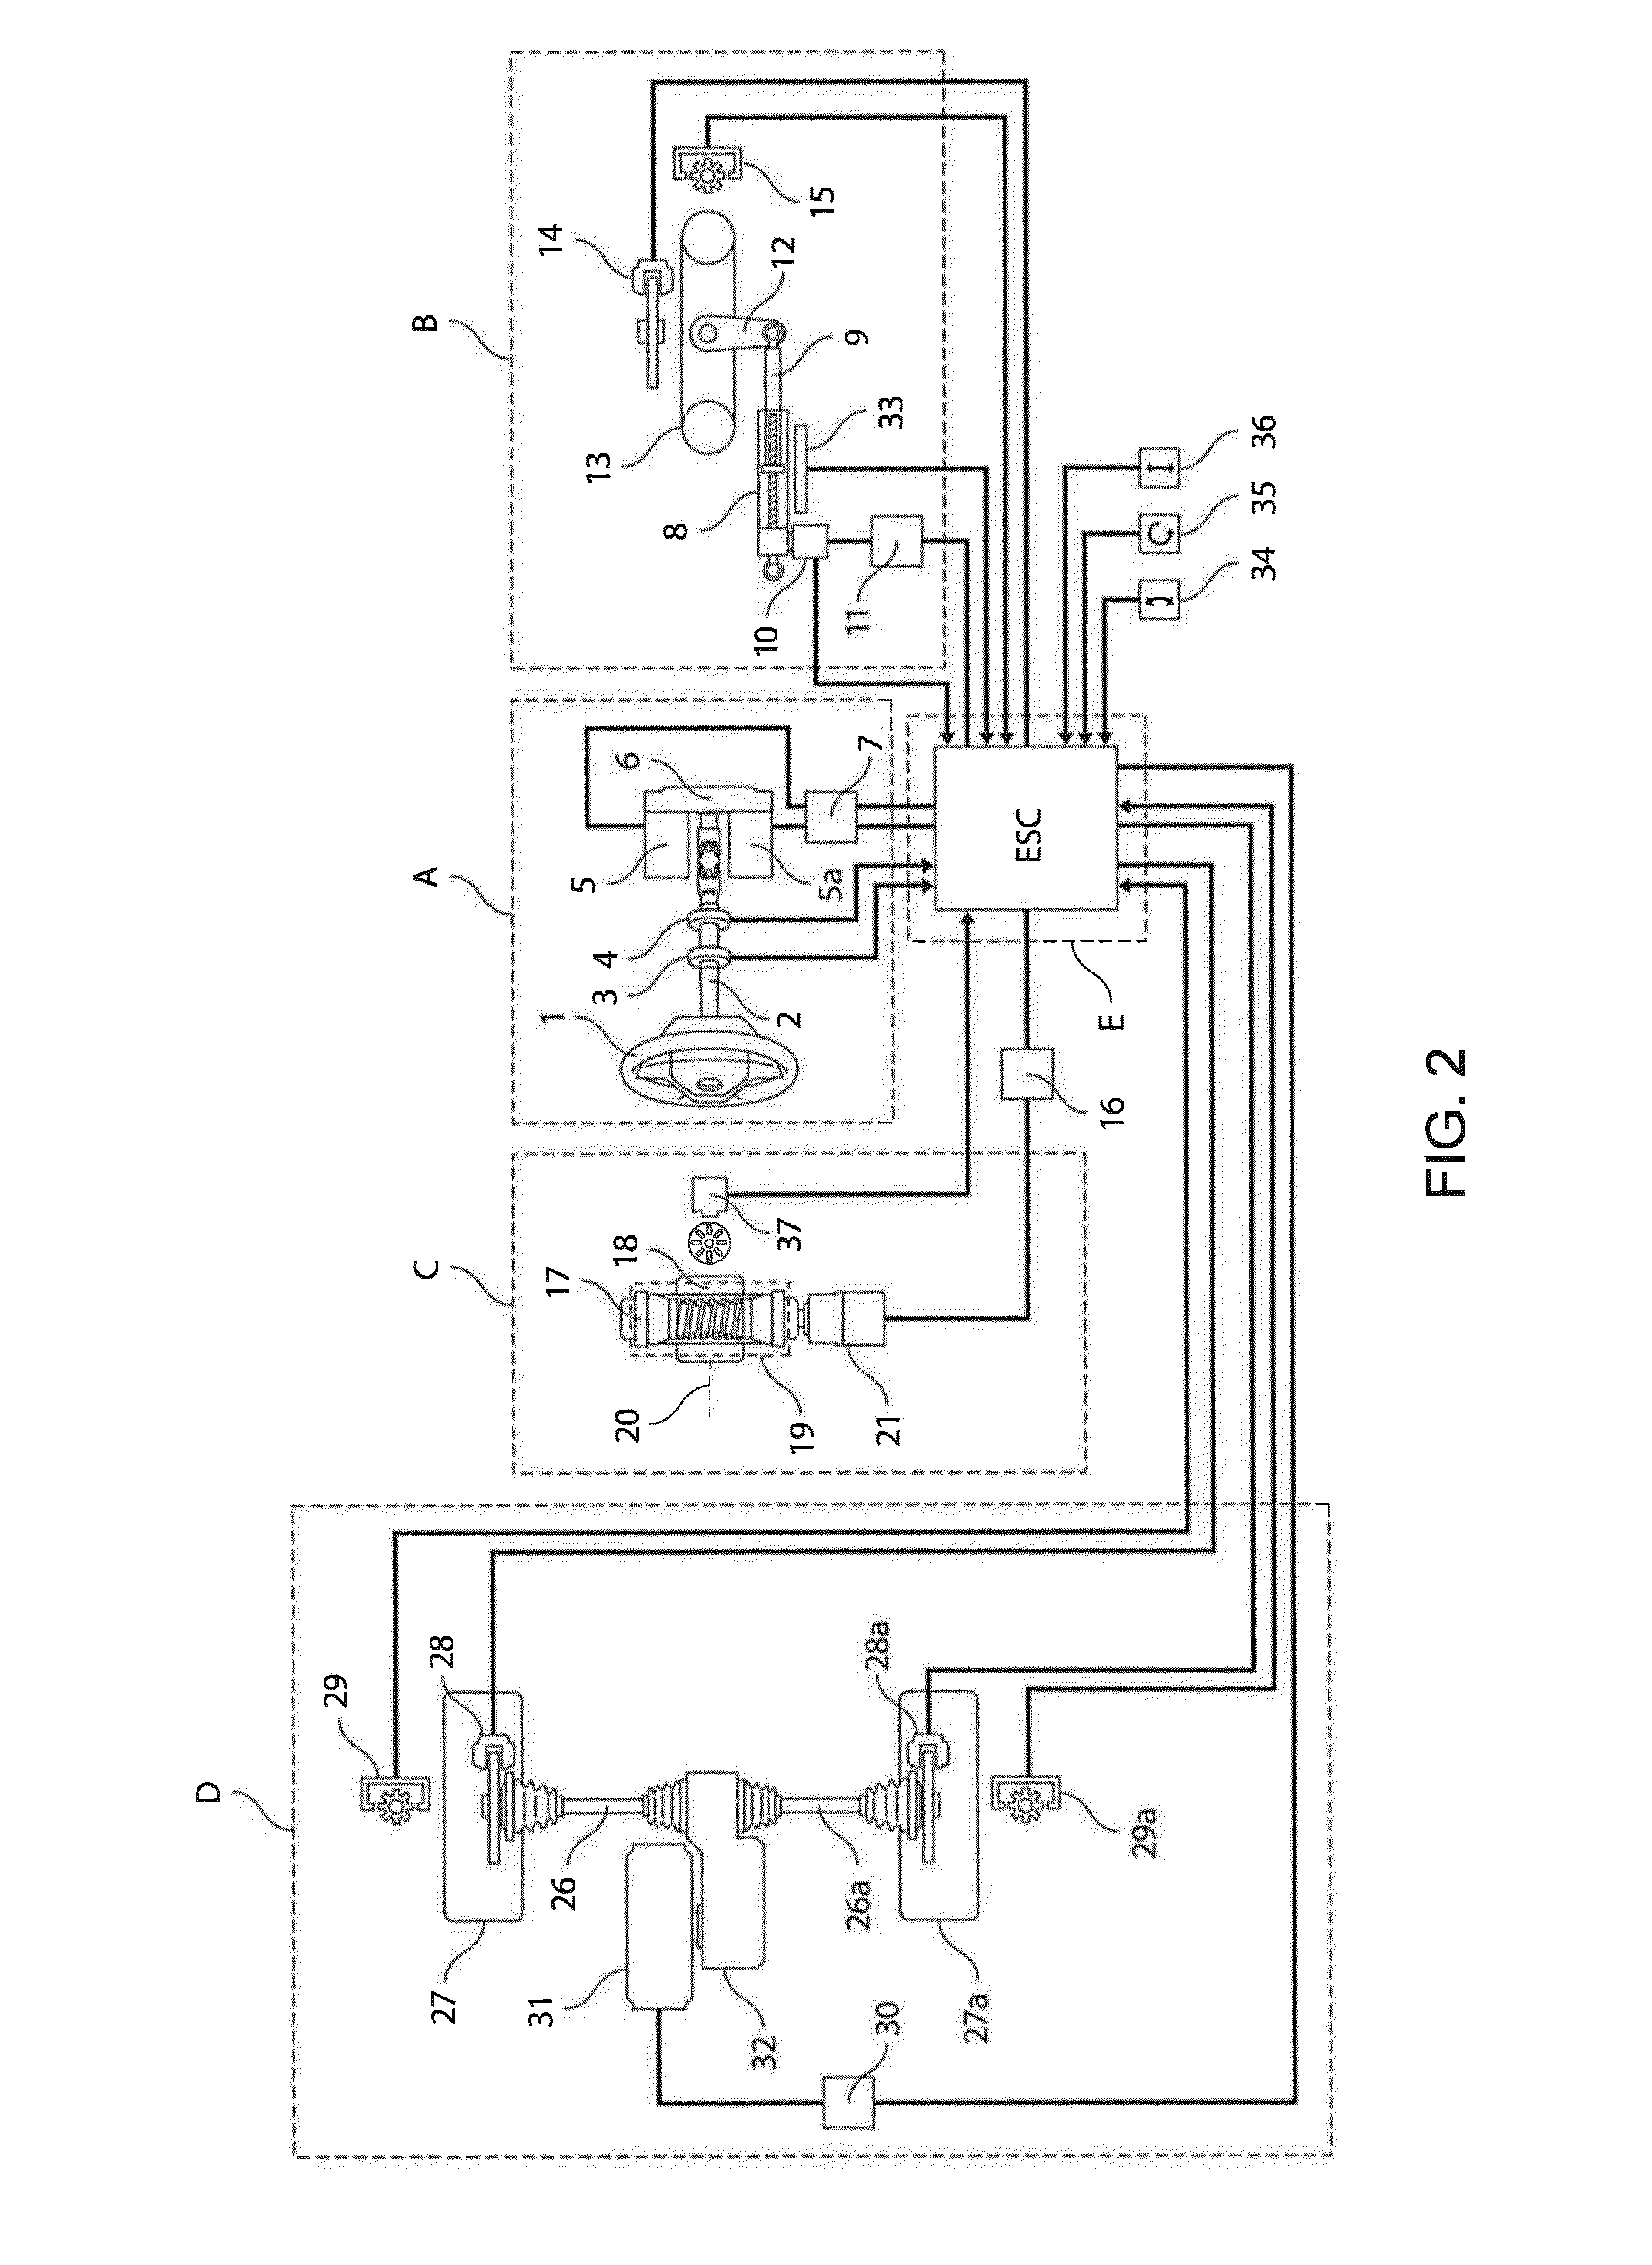 Steering and control systems for a three-wheeled vehicle